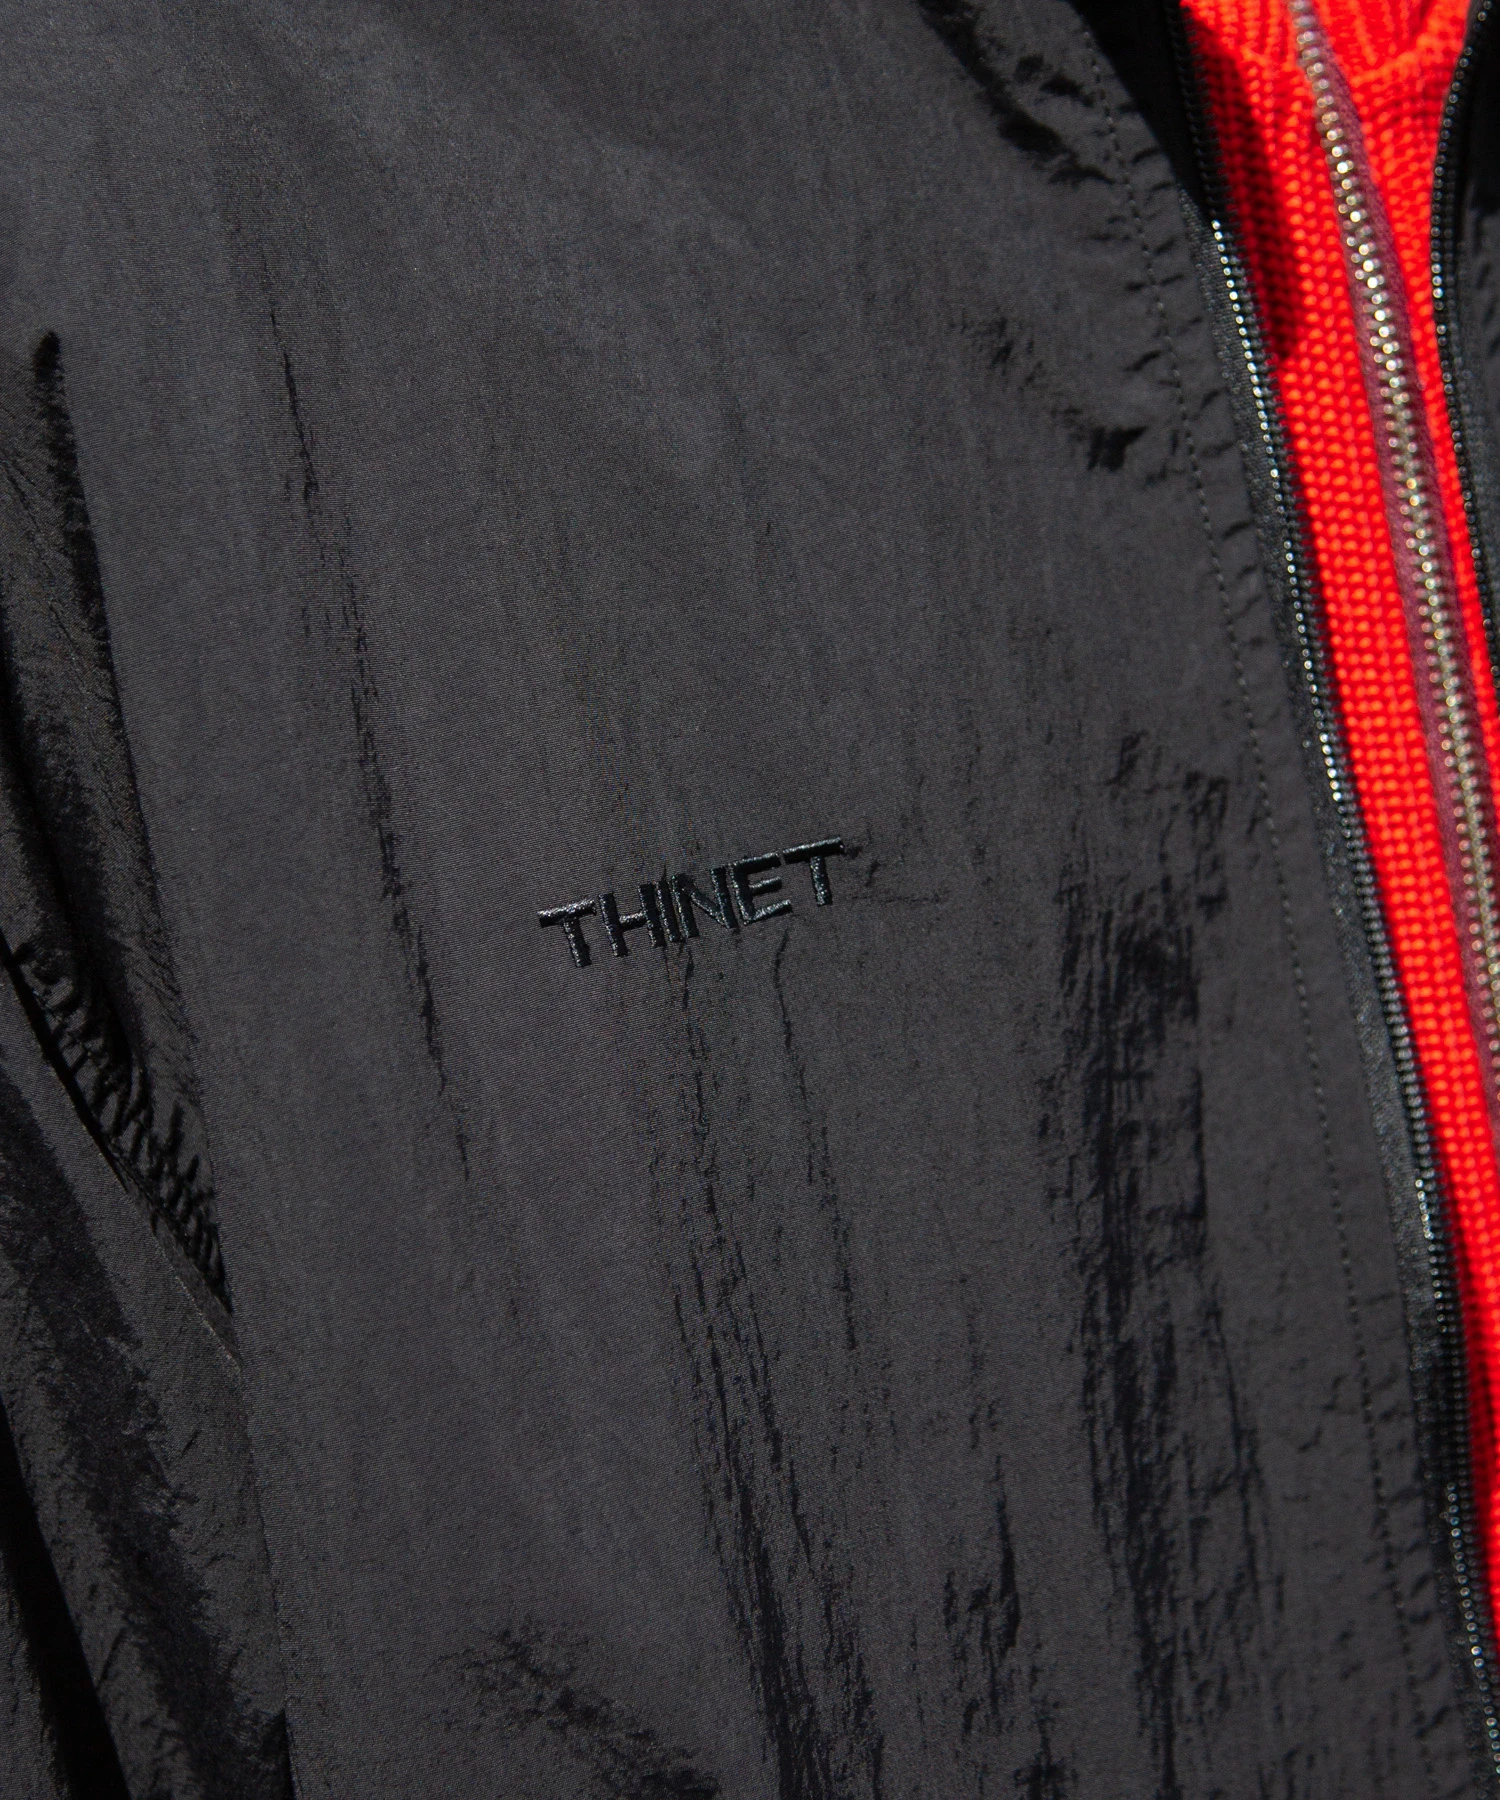 RN TRACK JACKET ｜ THINET（シンネット）公式通販 | Re:Circulet